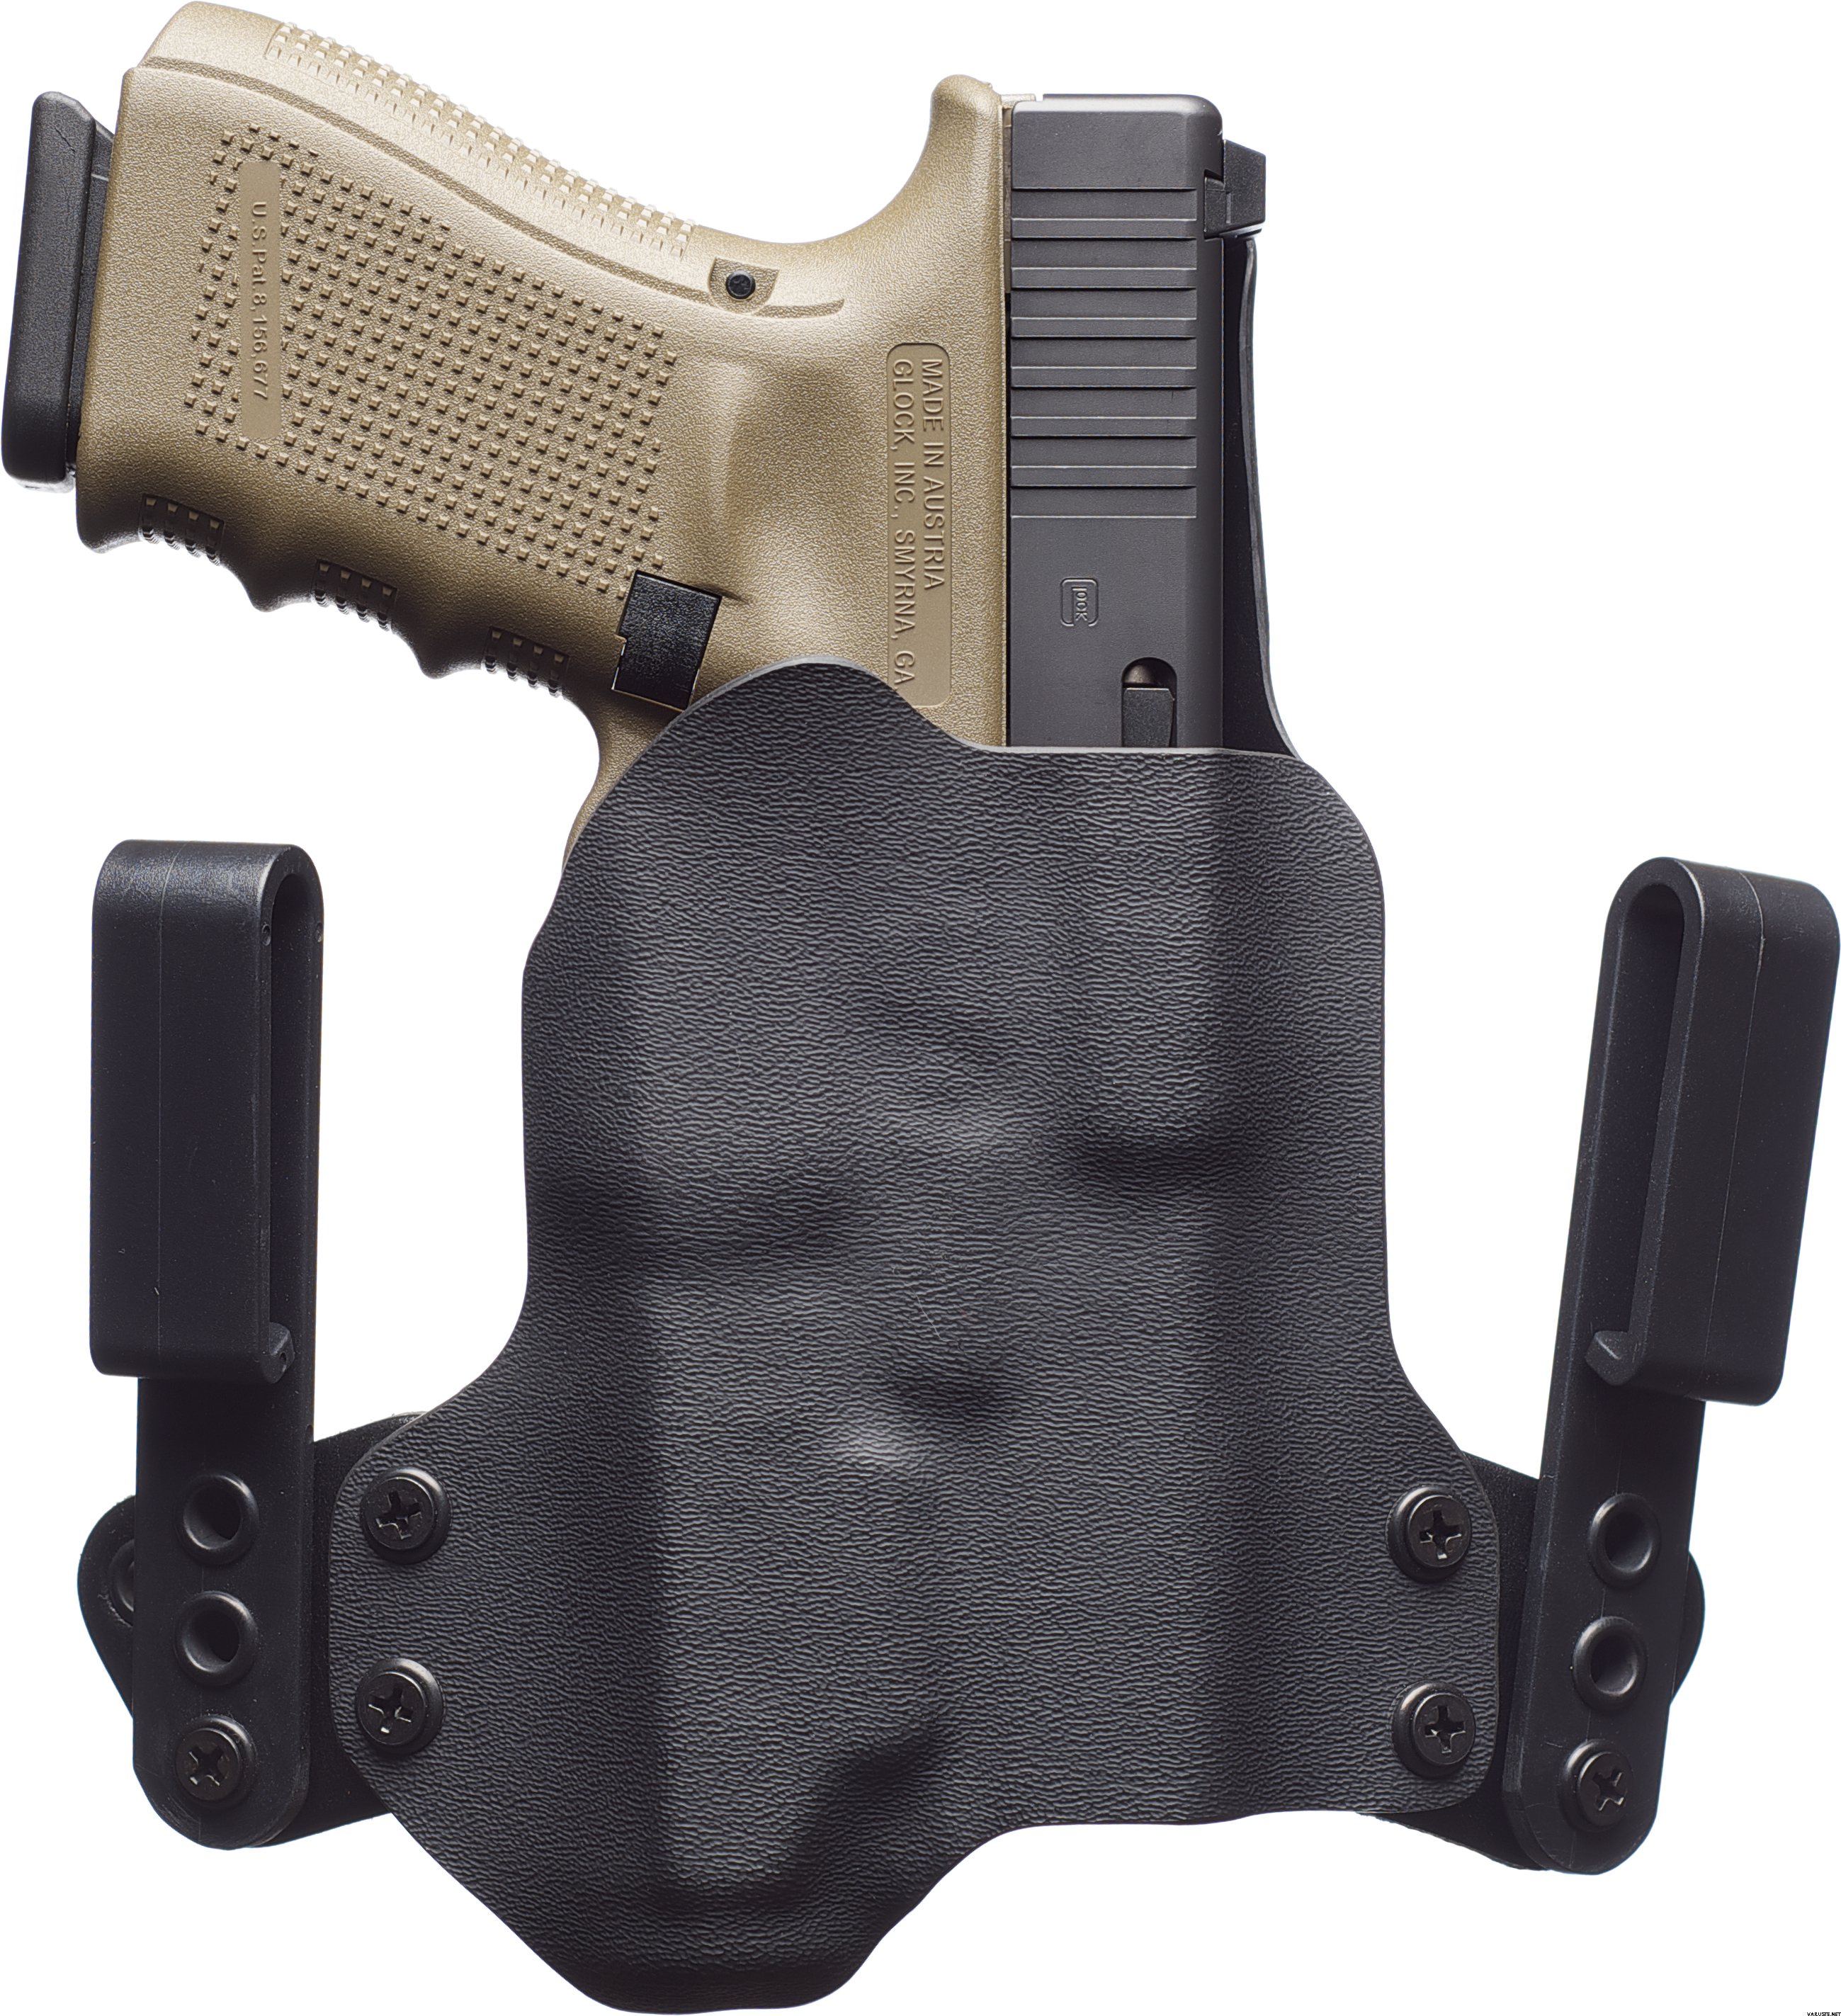 Glock 19 holster with rmr and light